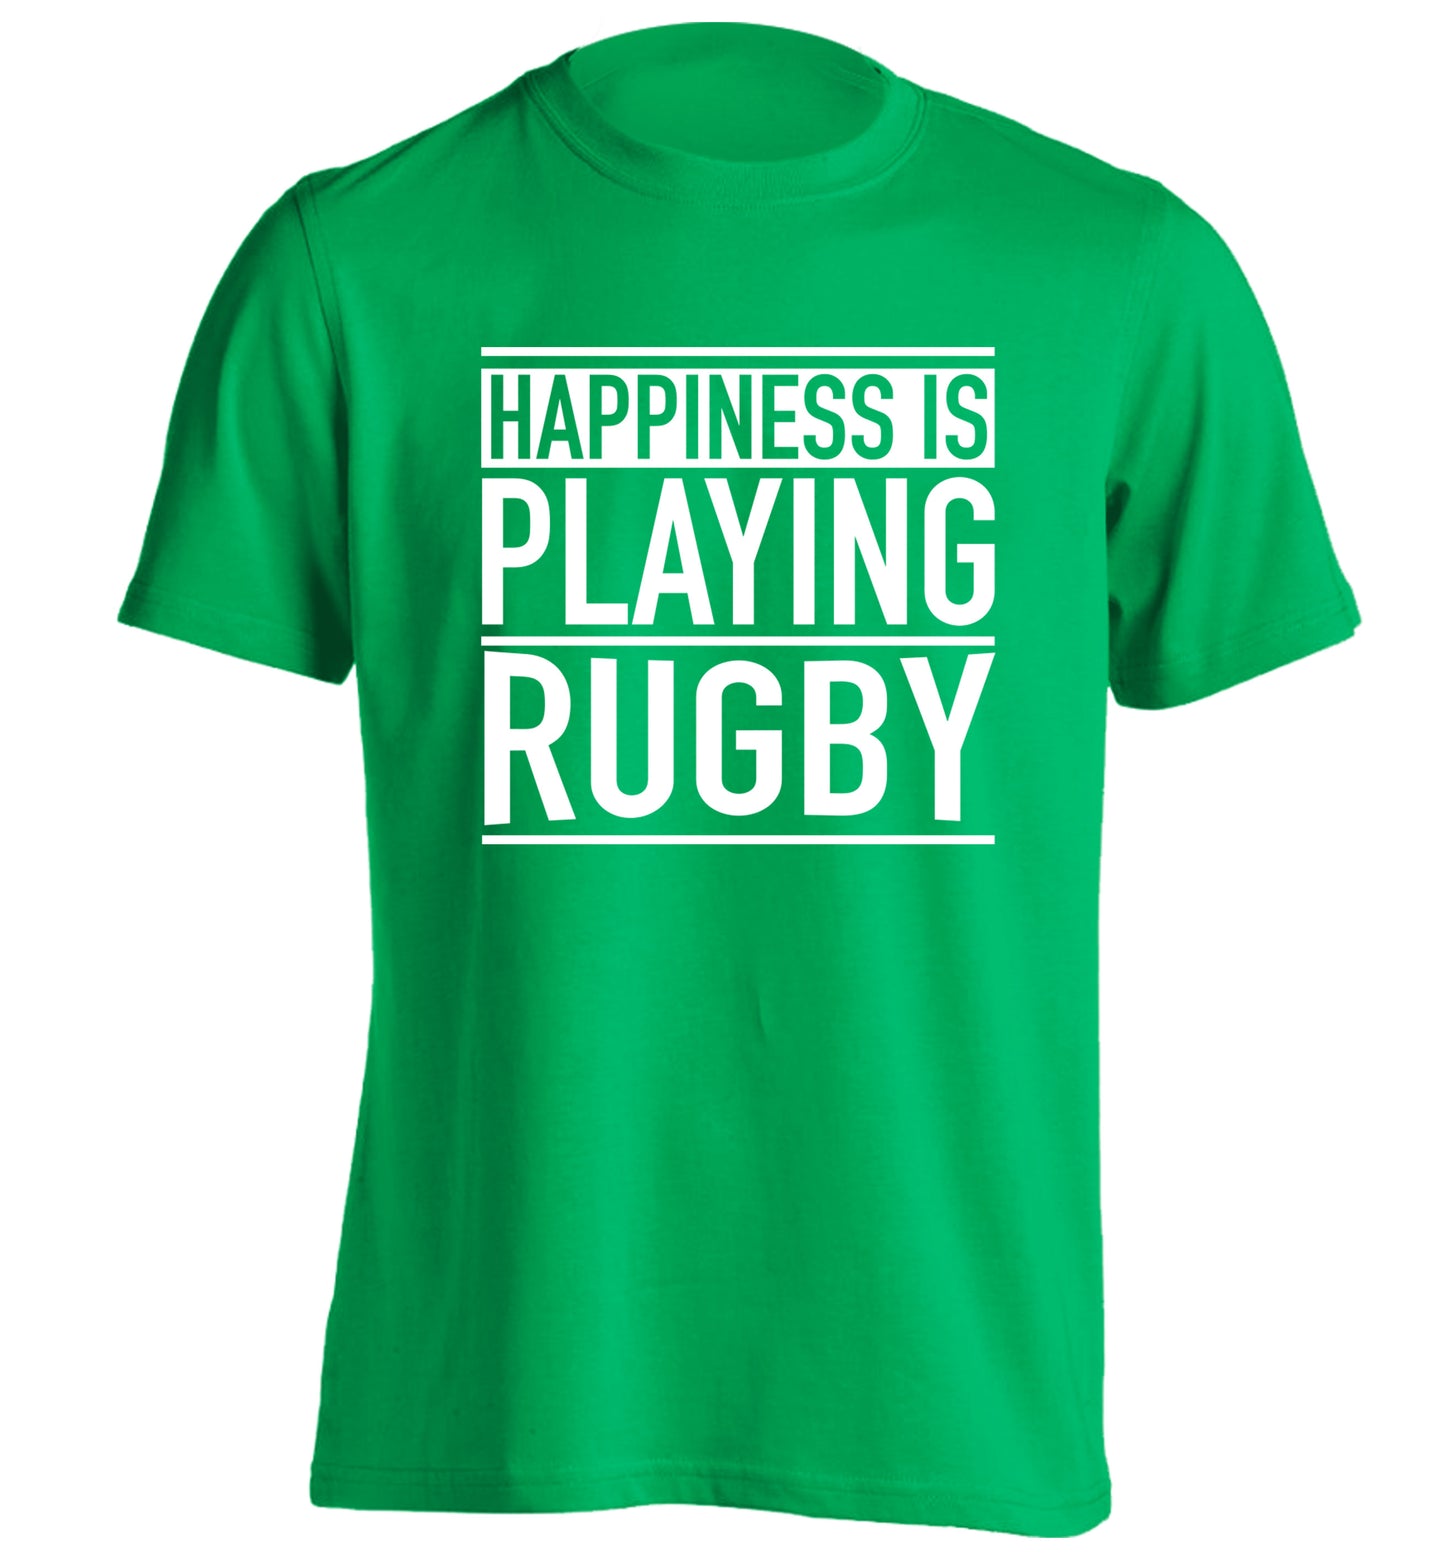 Happiness is playing rugby adults unisex green Tshirt 2XL